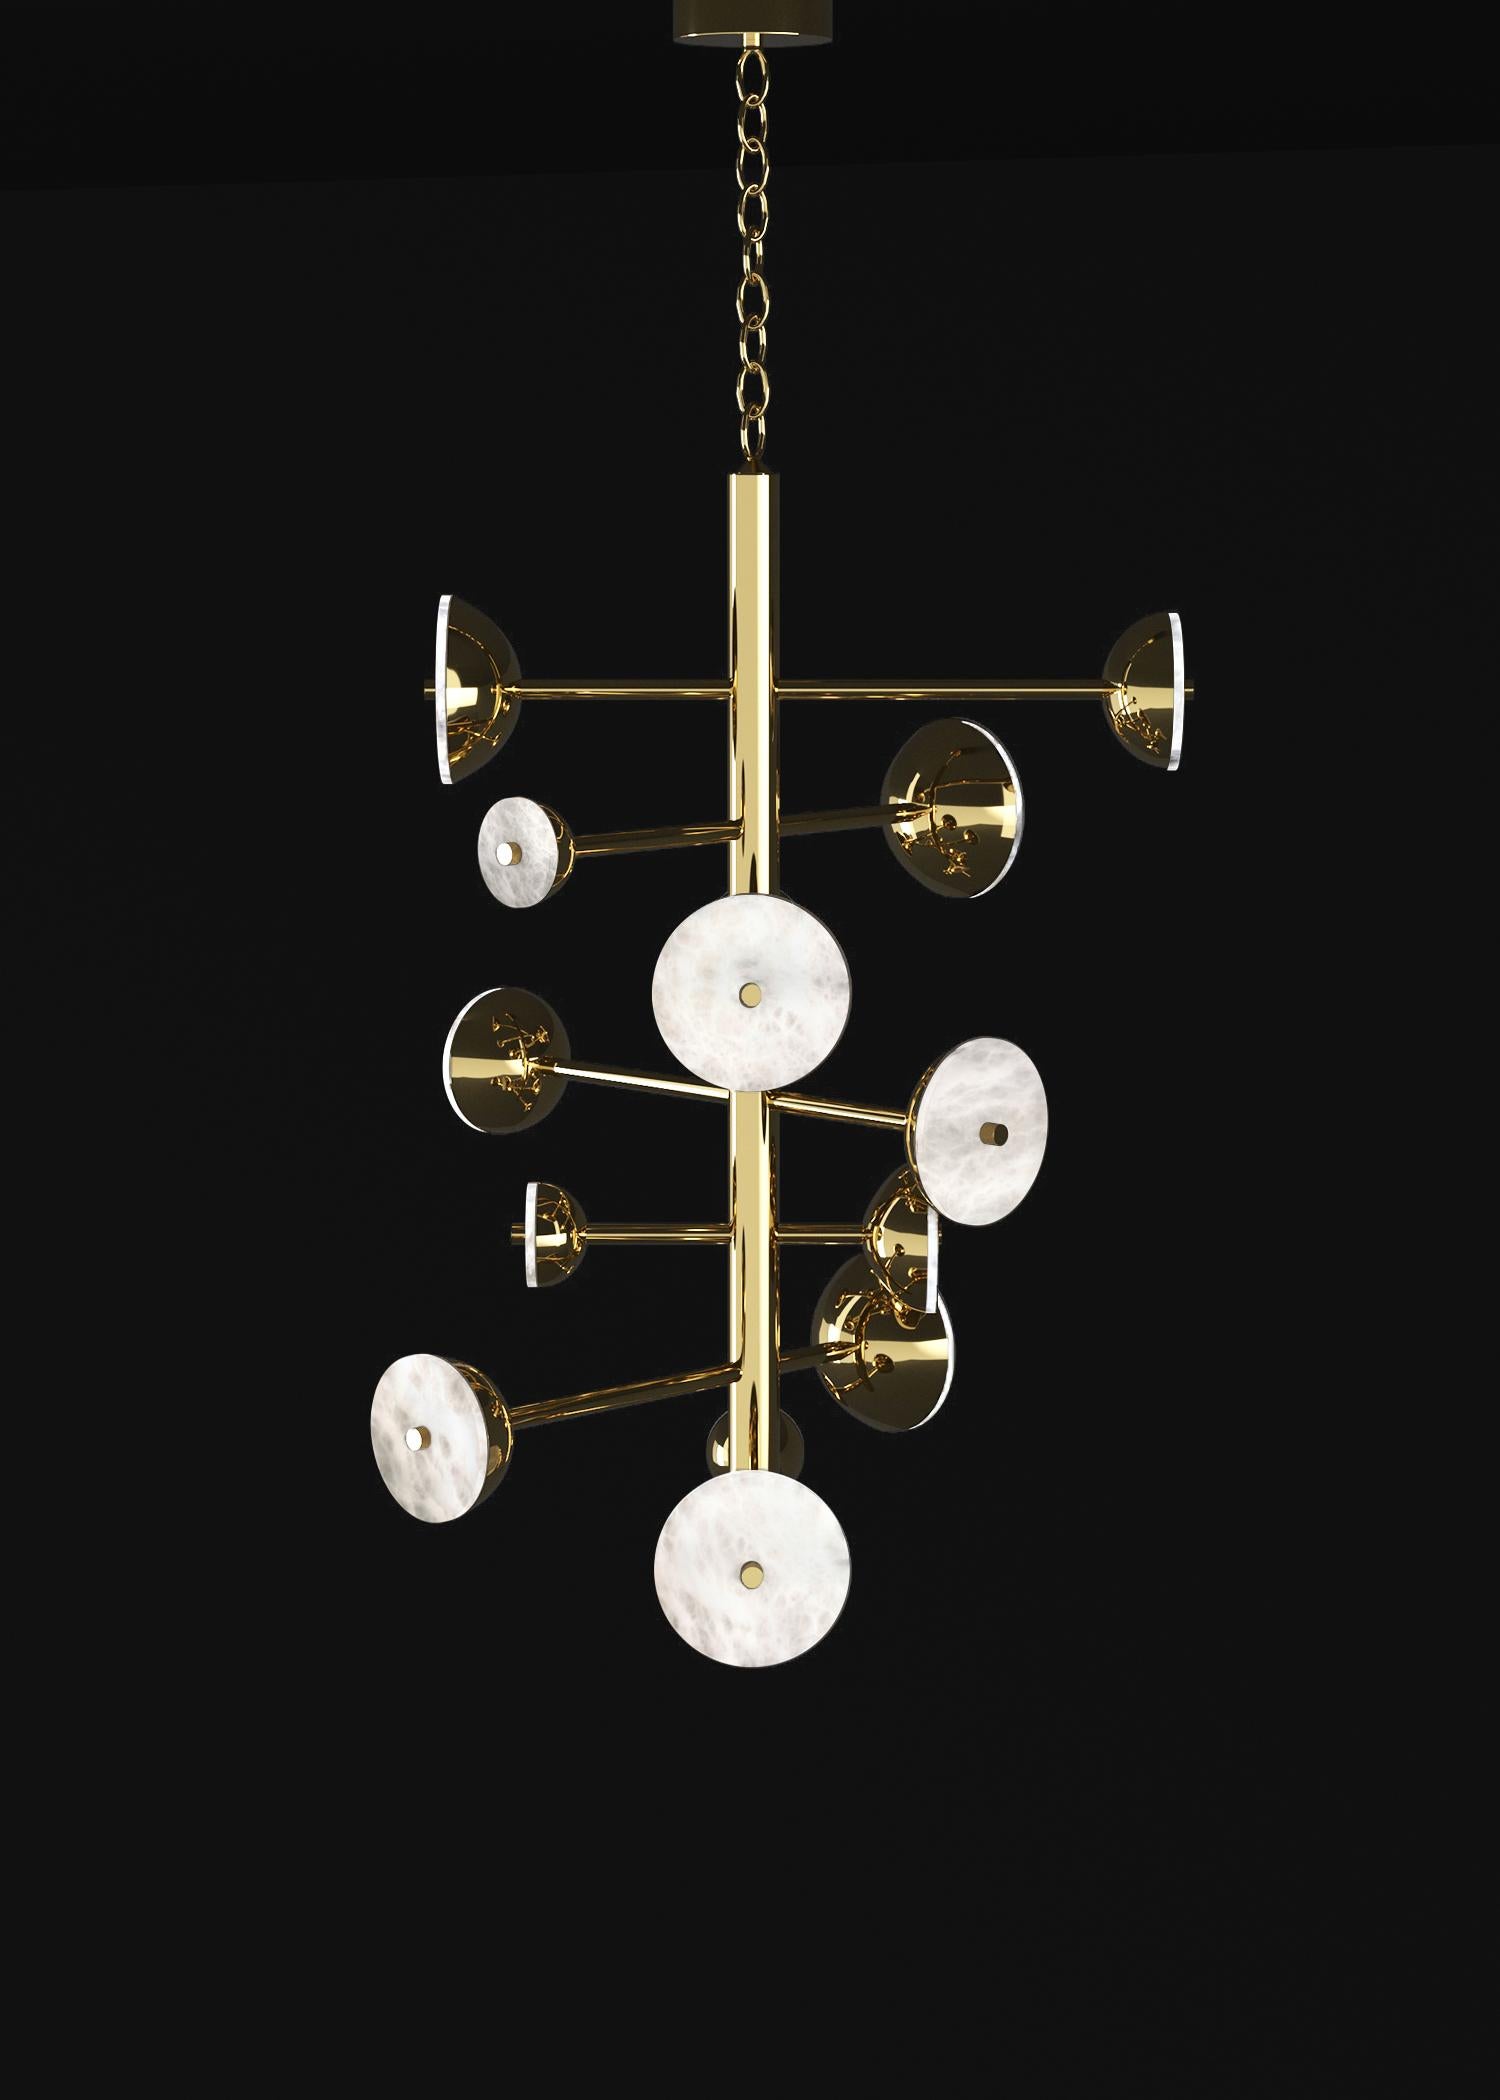 Teti Shiny Gold Metal Chandelier by Alabastro Italiano
Dimensions: D 74,5 x W 77,5 x H 110 cm.
Materials: White alabaster and metal.

Available in different finishes: Shiny Silver, Bronze, Brushed Brass, Ruggine of Florence, Brushed Burnished, Shiny